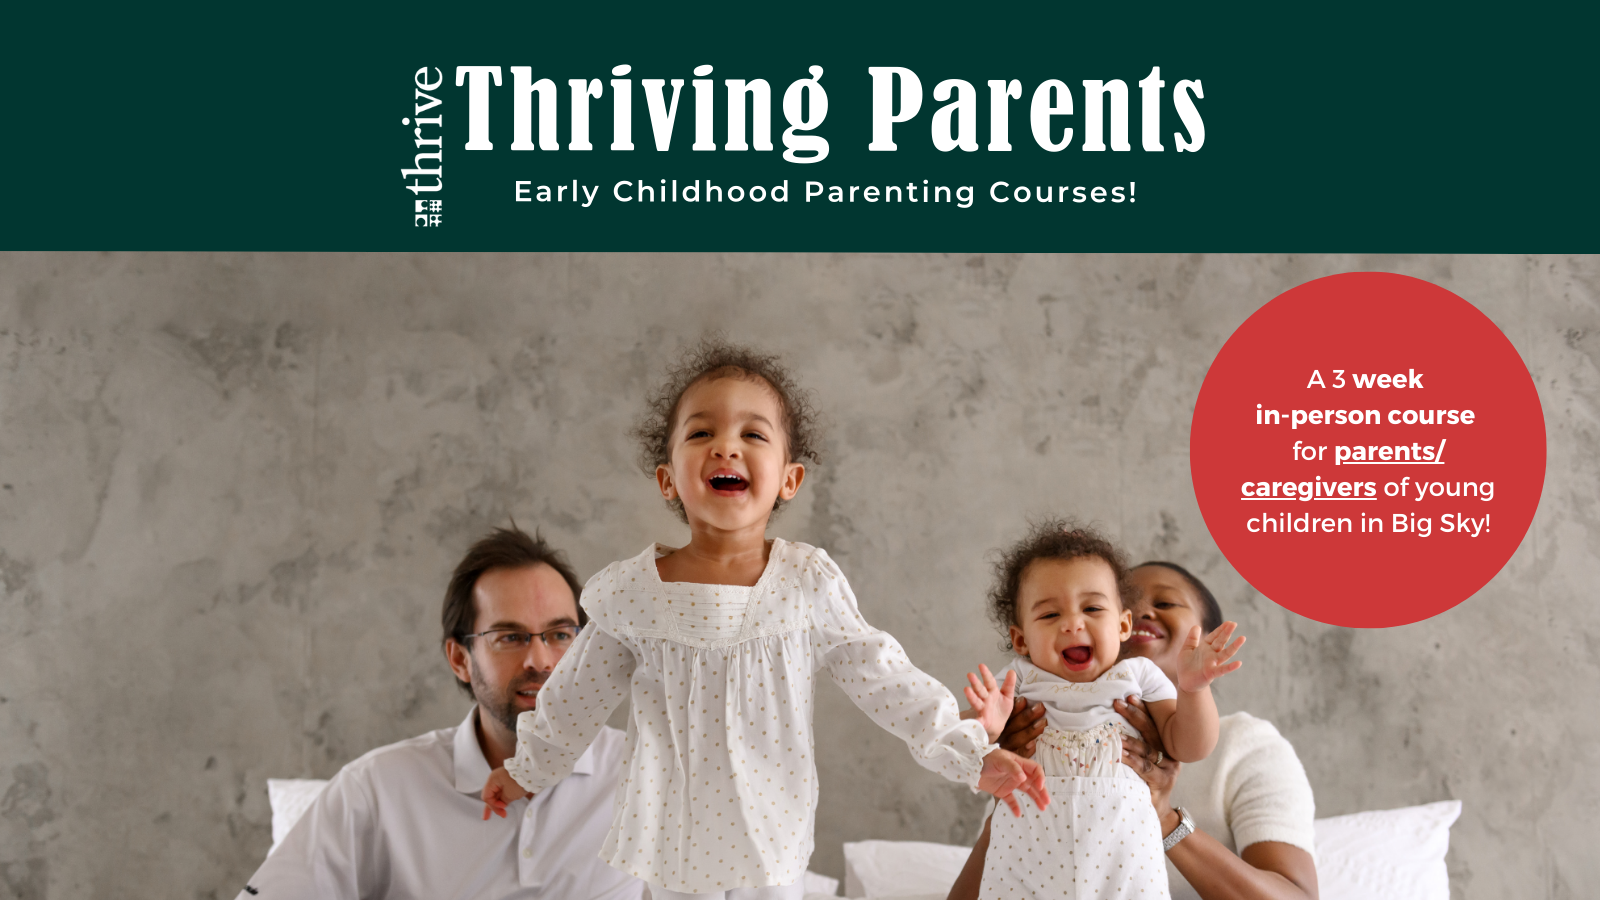 Thriving Parents: Early Childhood Parenting Courses